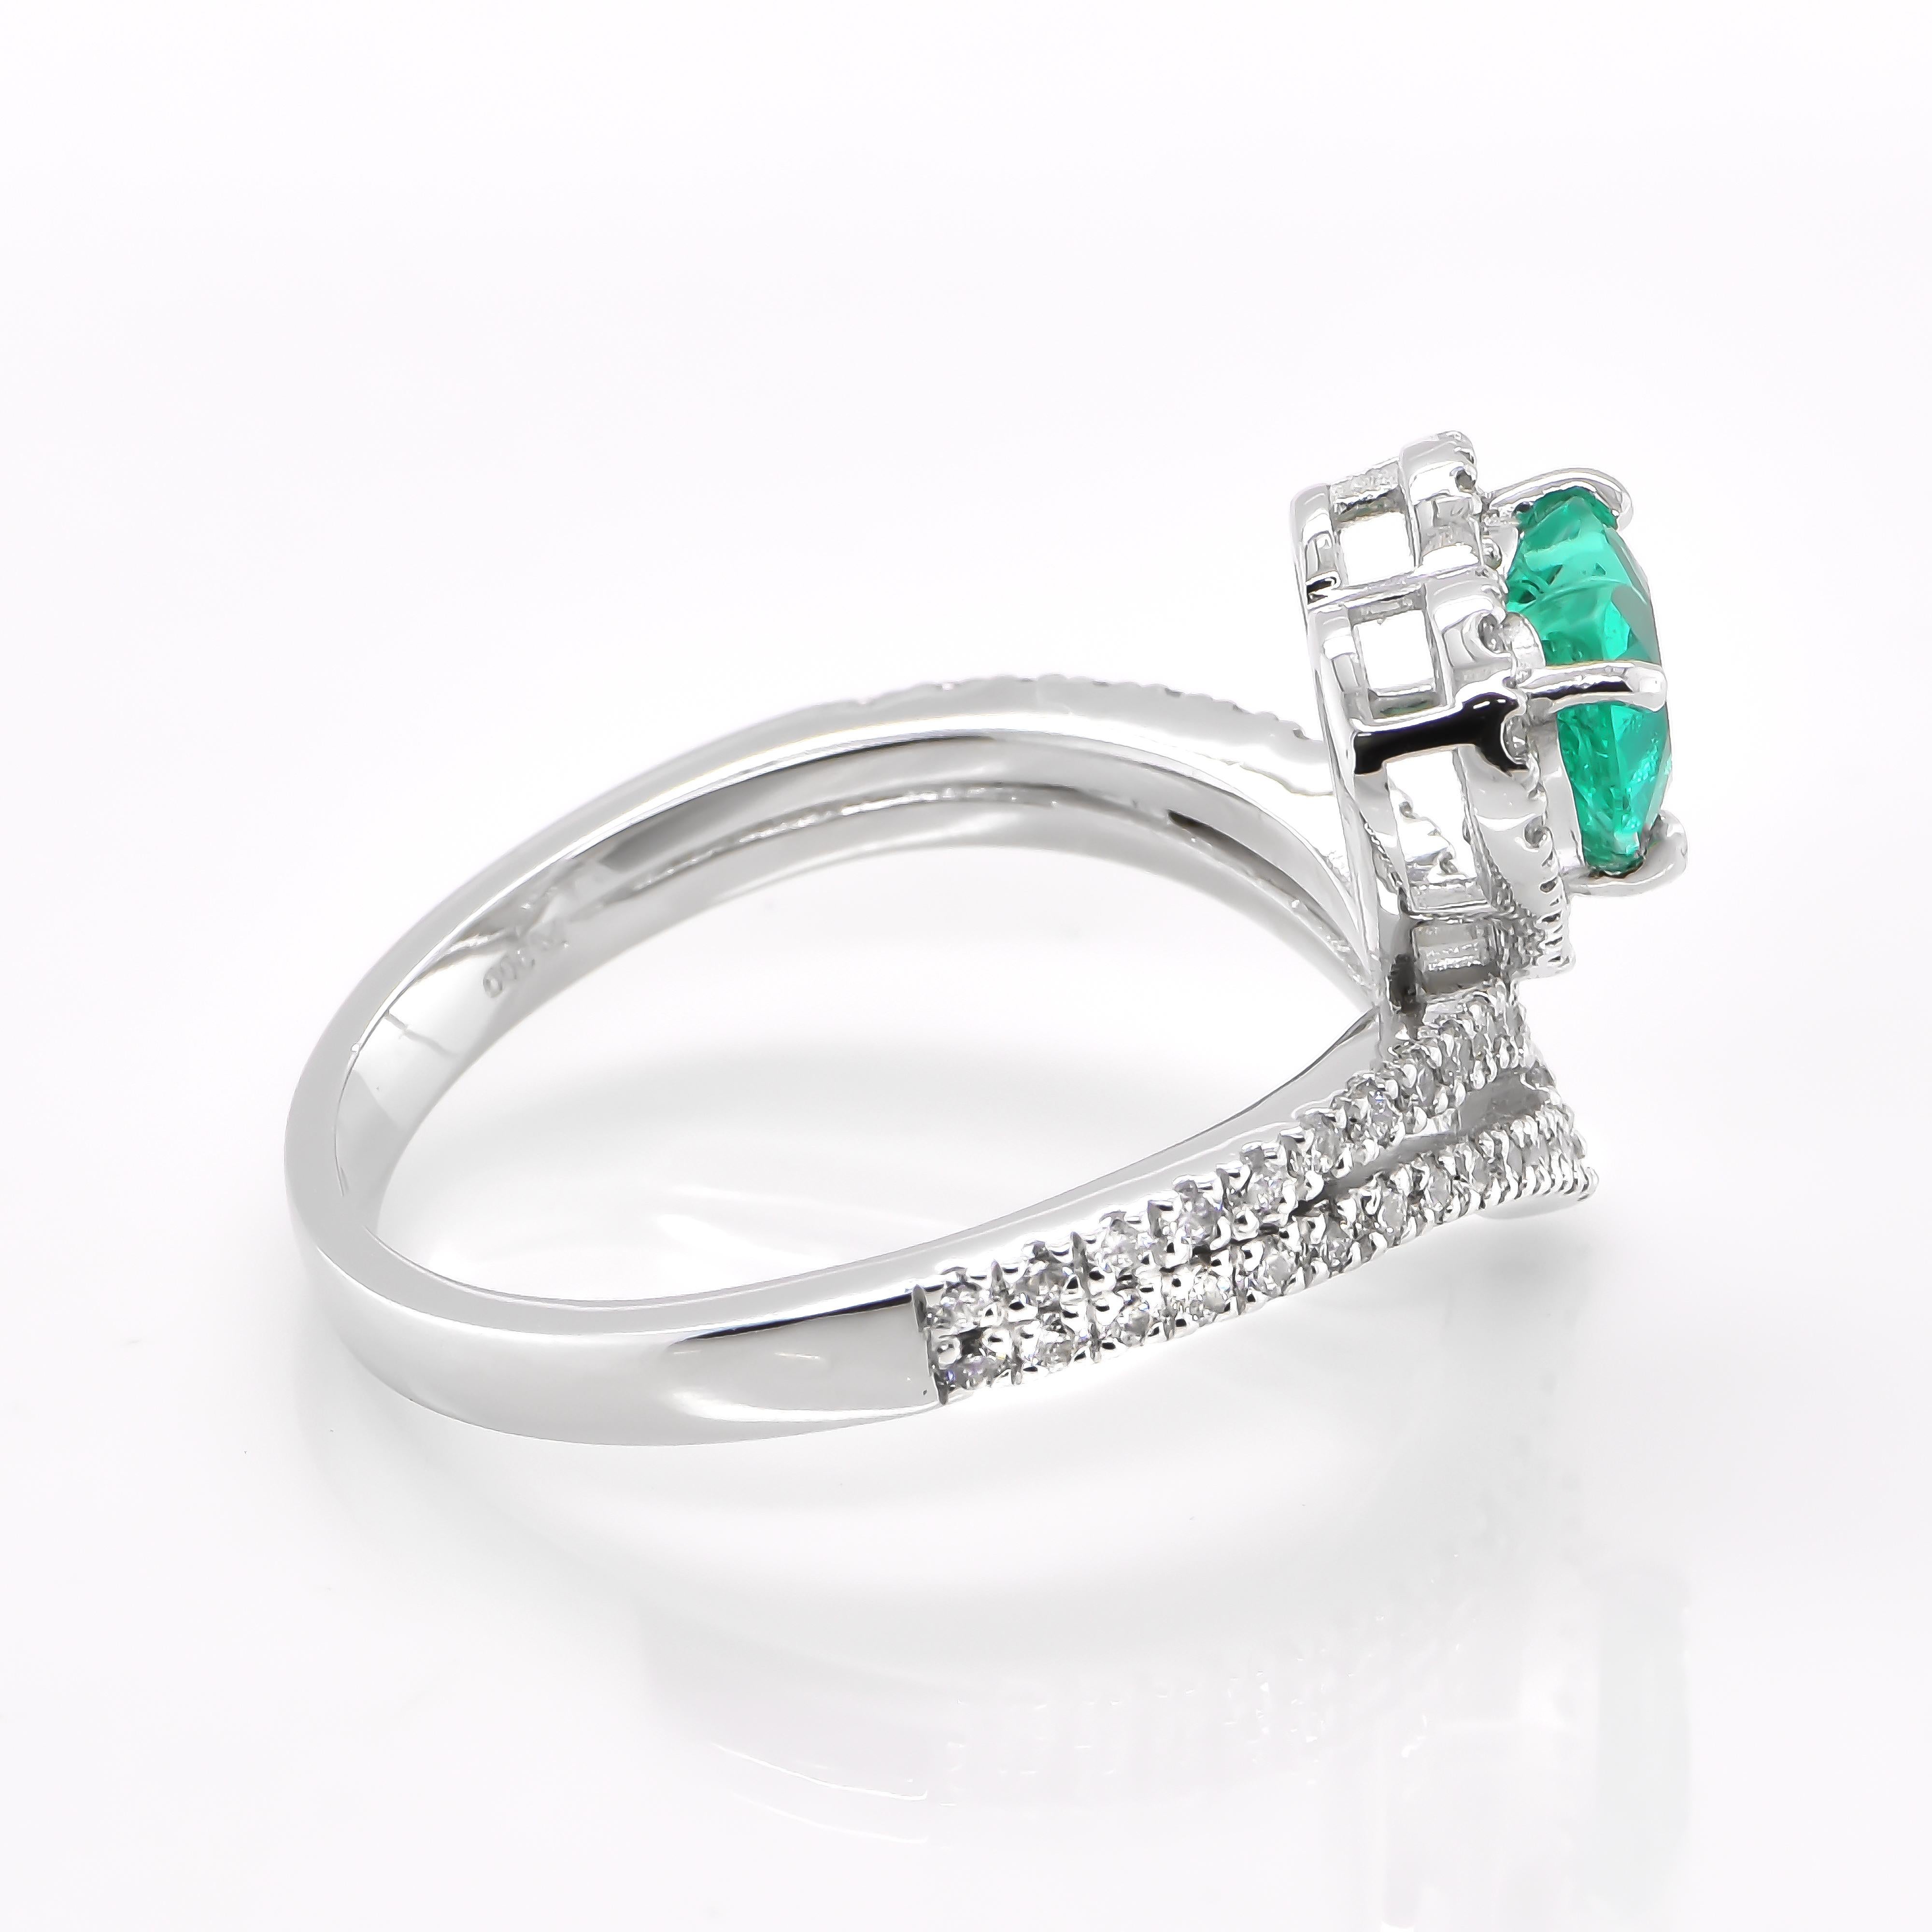 Heart Cut 0.65 Carat Emerald and Diamond Tiara Cocktail Ring Made in Platinum For Sale